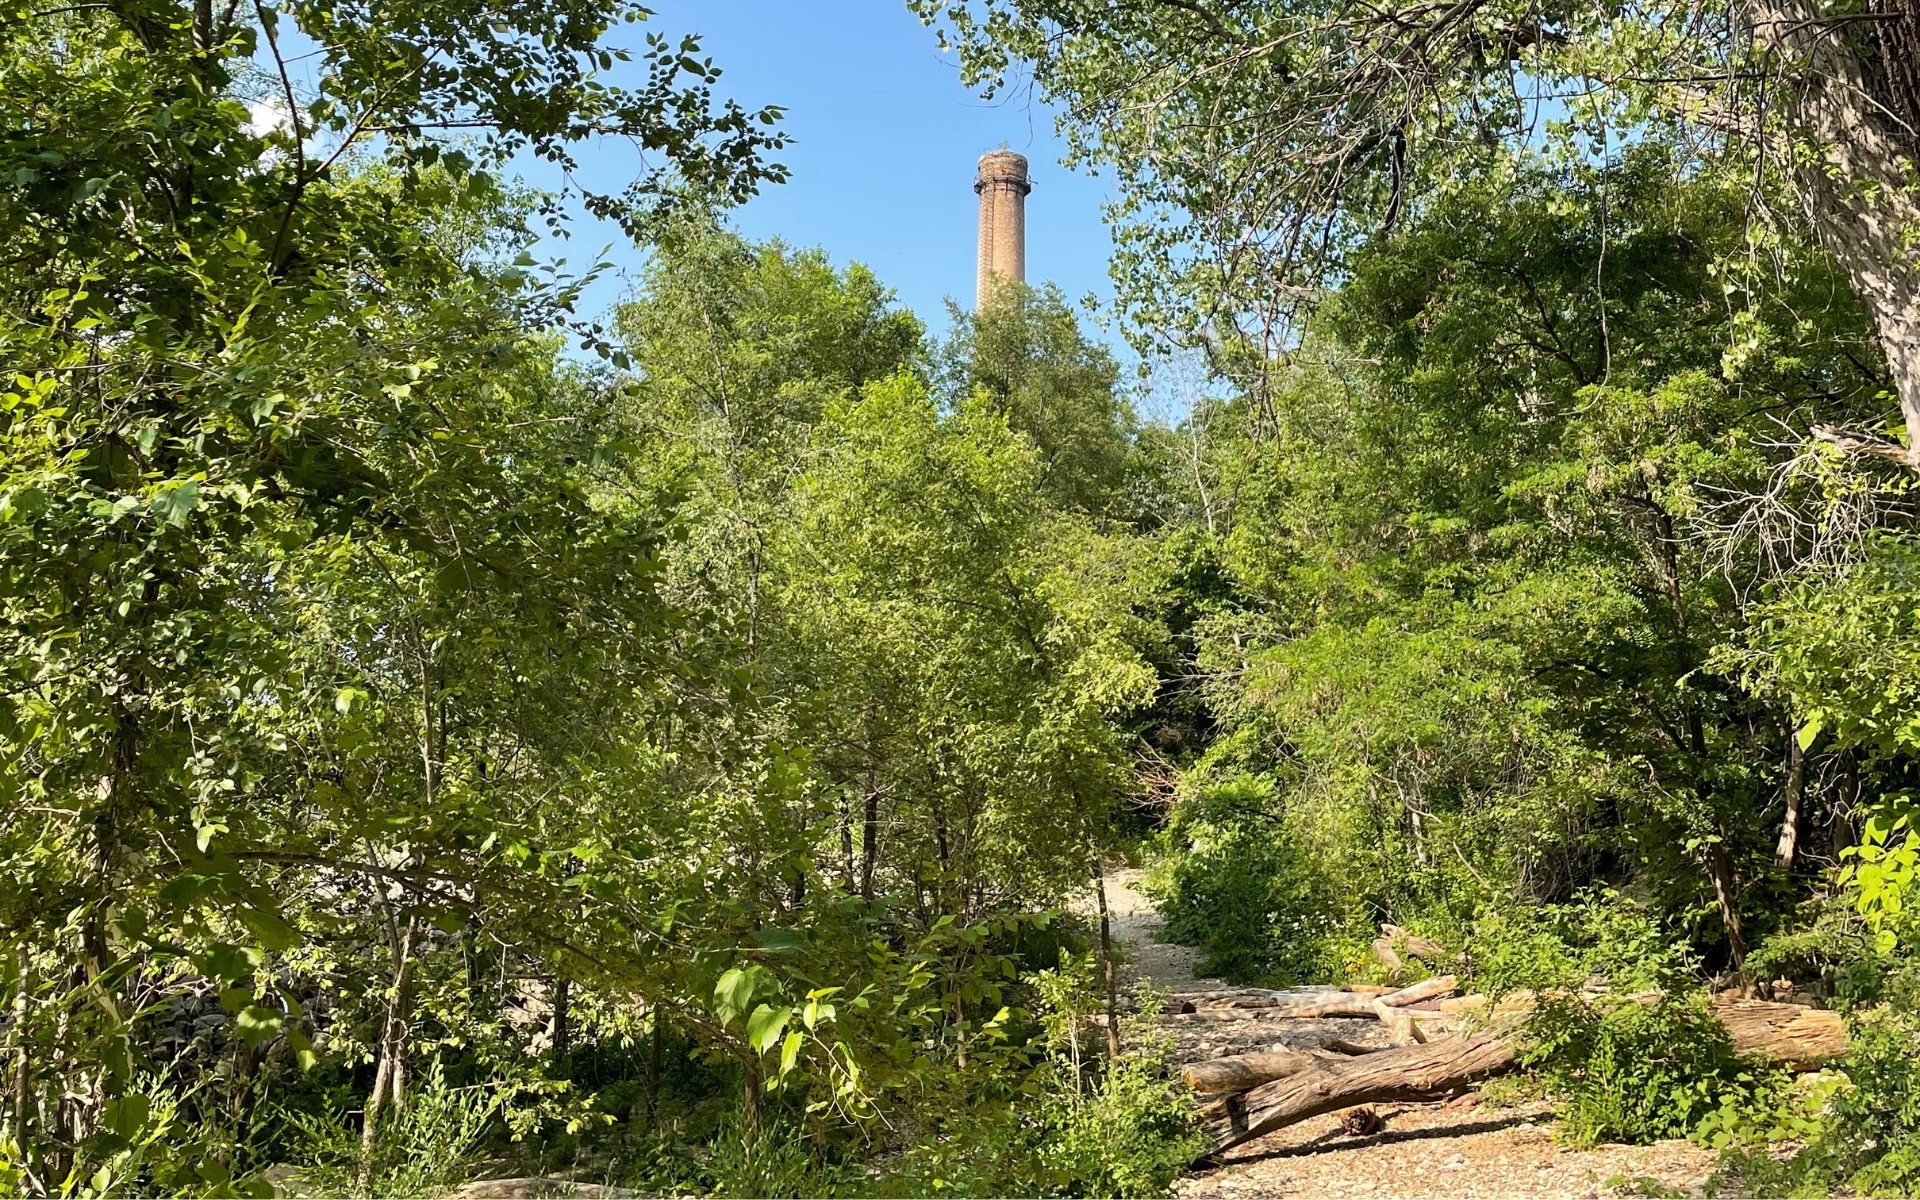 Shrubs and trees, green with summer growth, cover a small walking area that is the Ford Area C dumpsite. High above, the smokestack from the old Ford plant peeks through a break in the canopy.